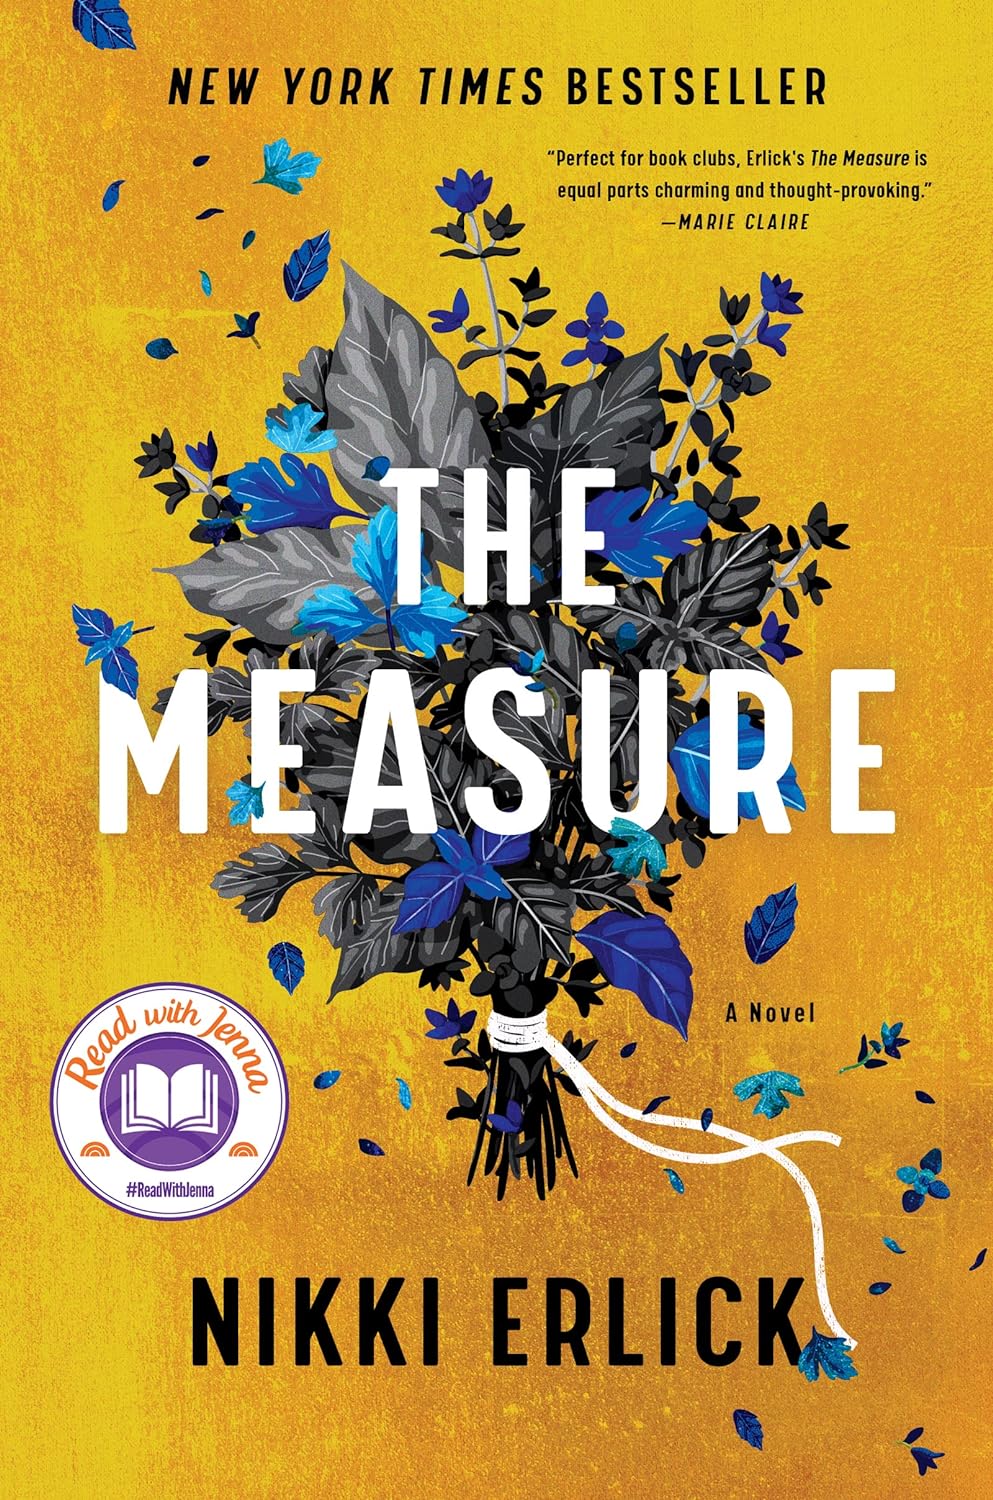 Image of "The Measure"